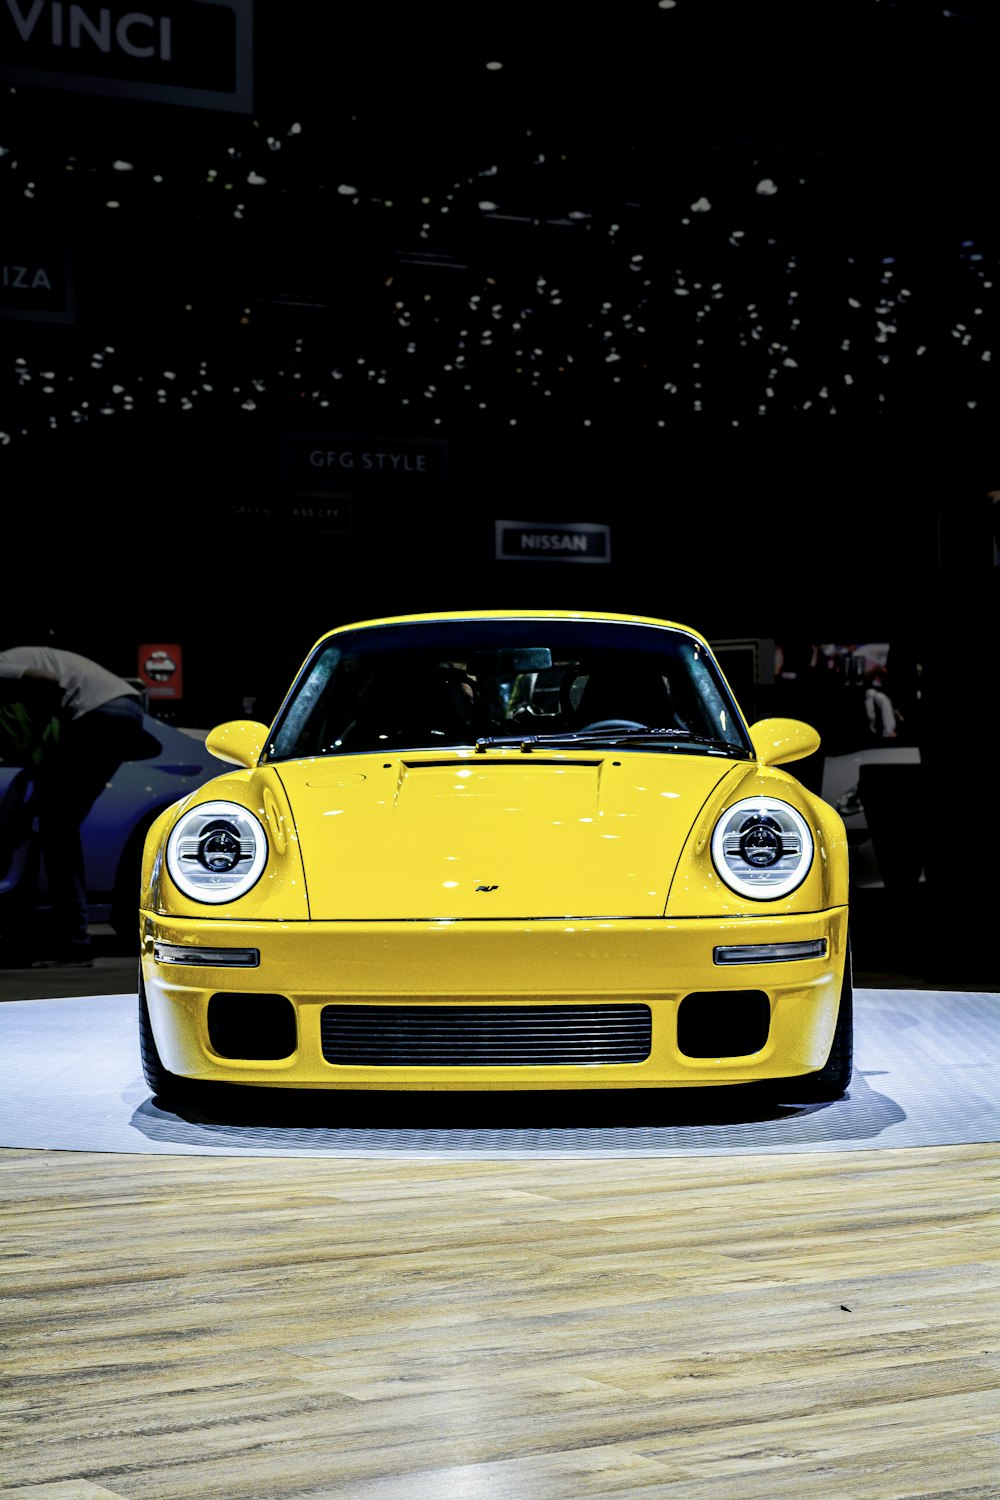 yellow porsche 911 parked on street during night time